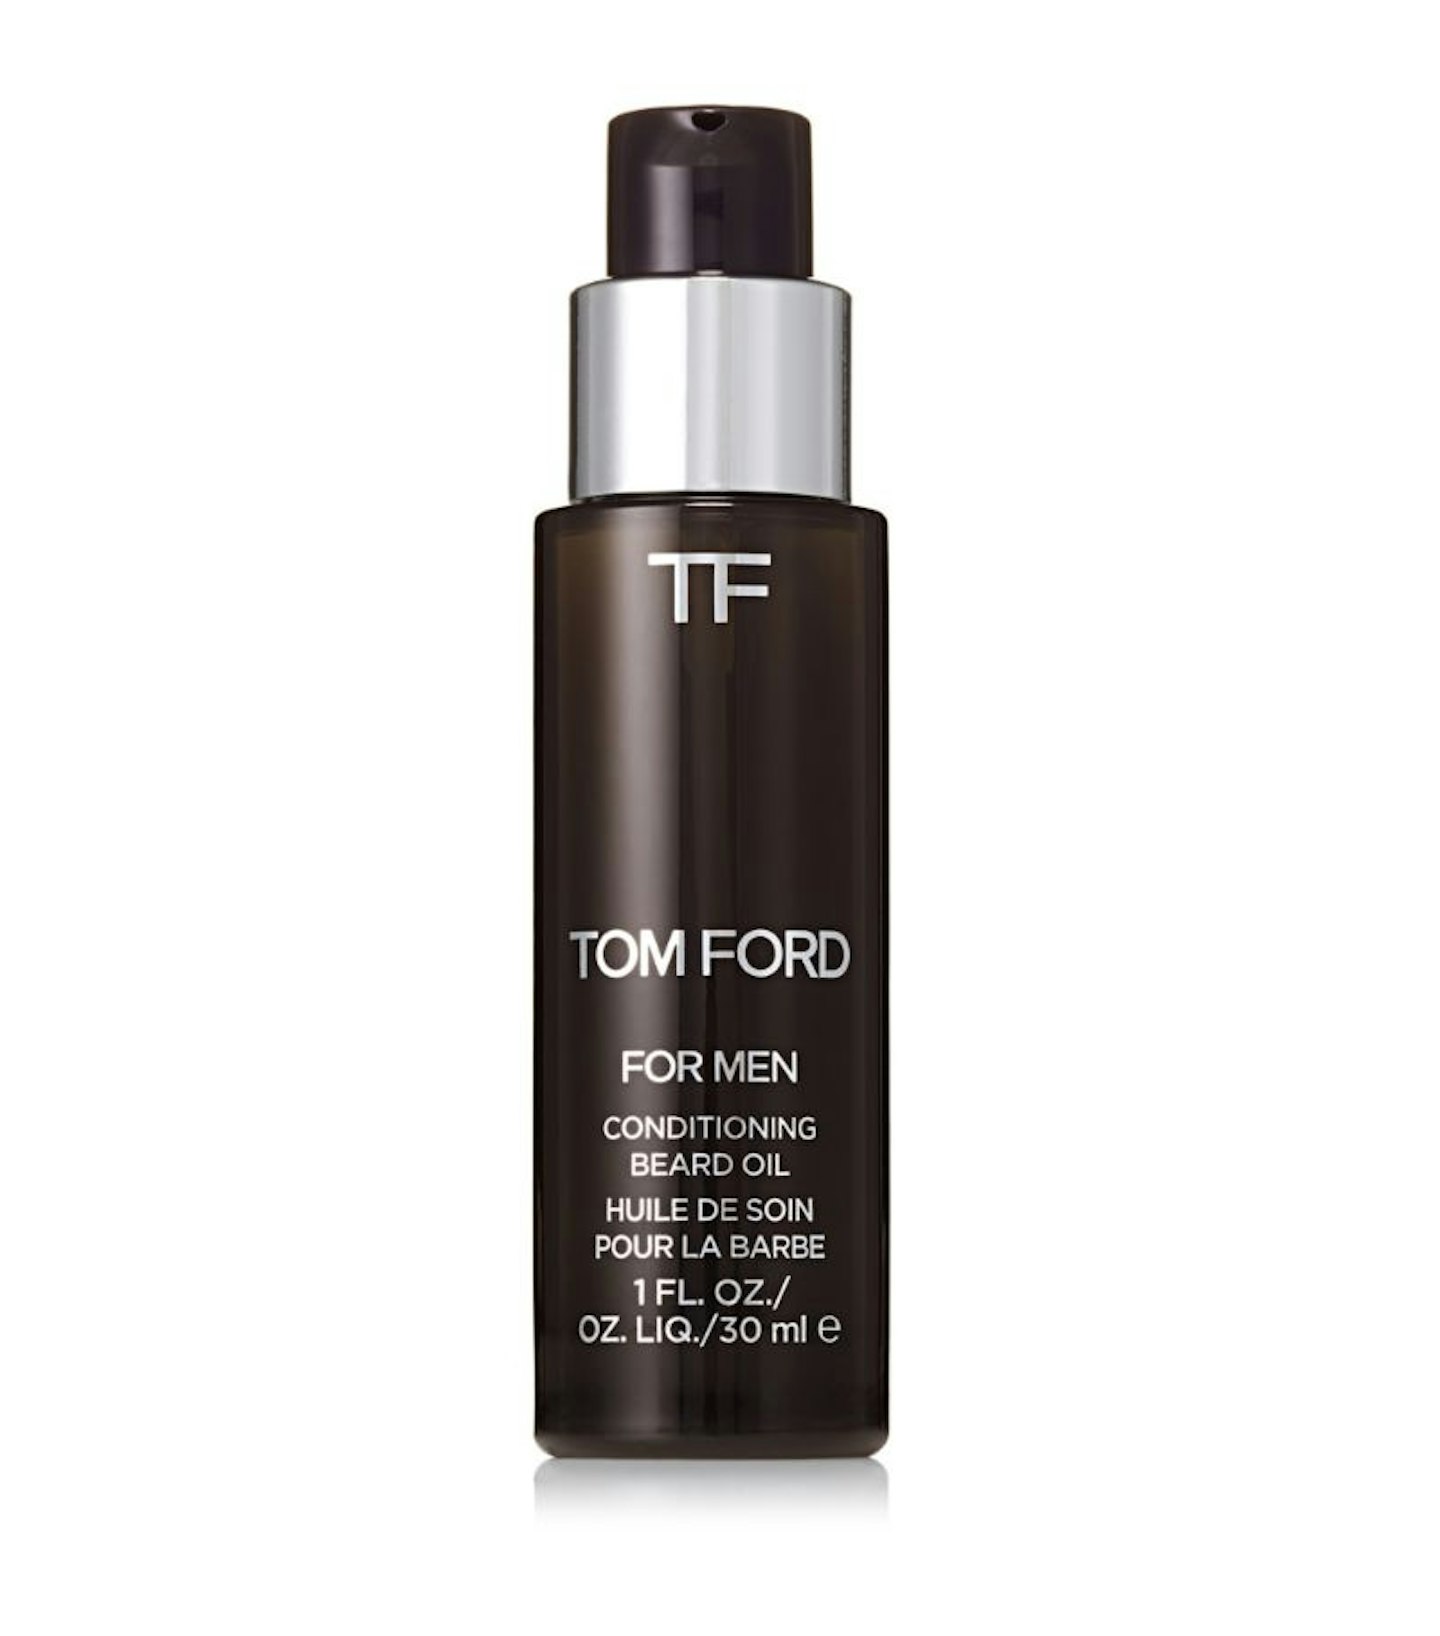 Tom Ford Conditioning Beard Oil in Tobacco Vanille, £44